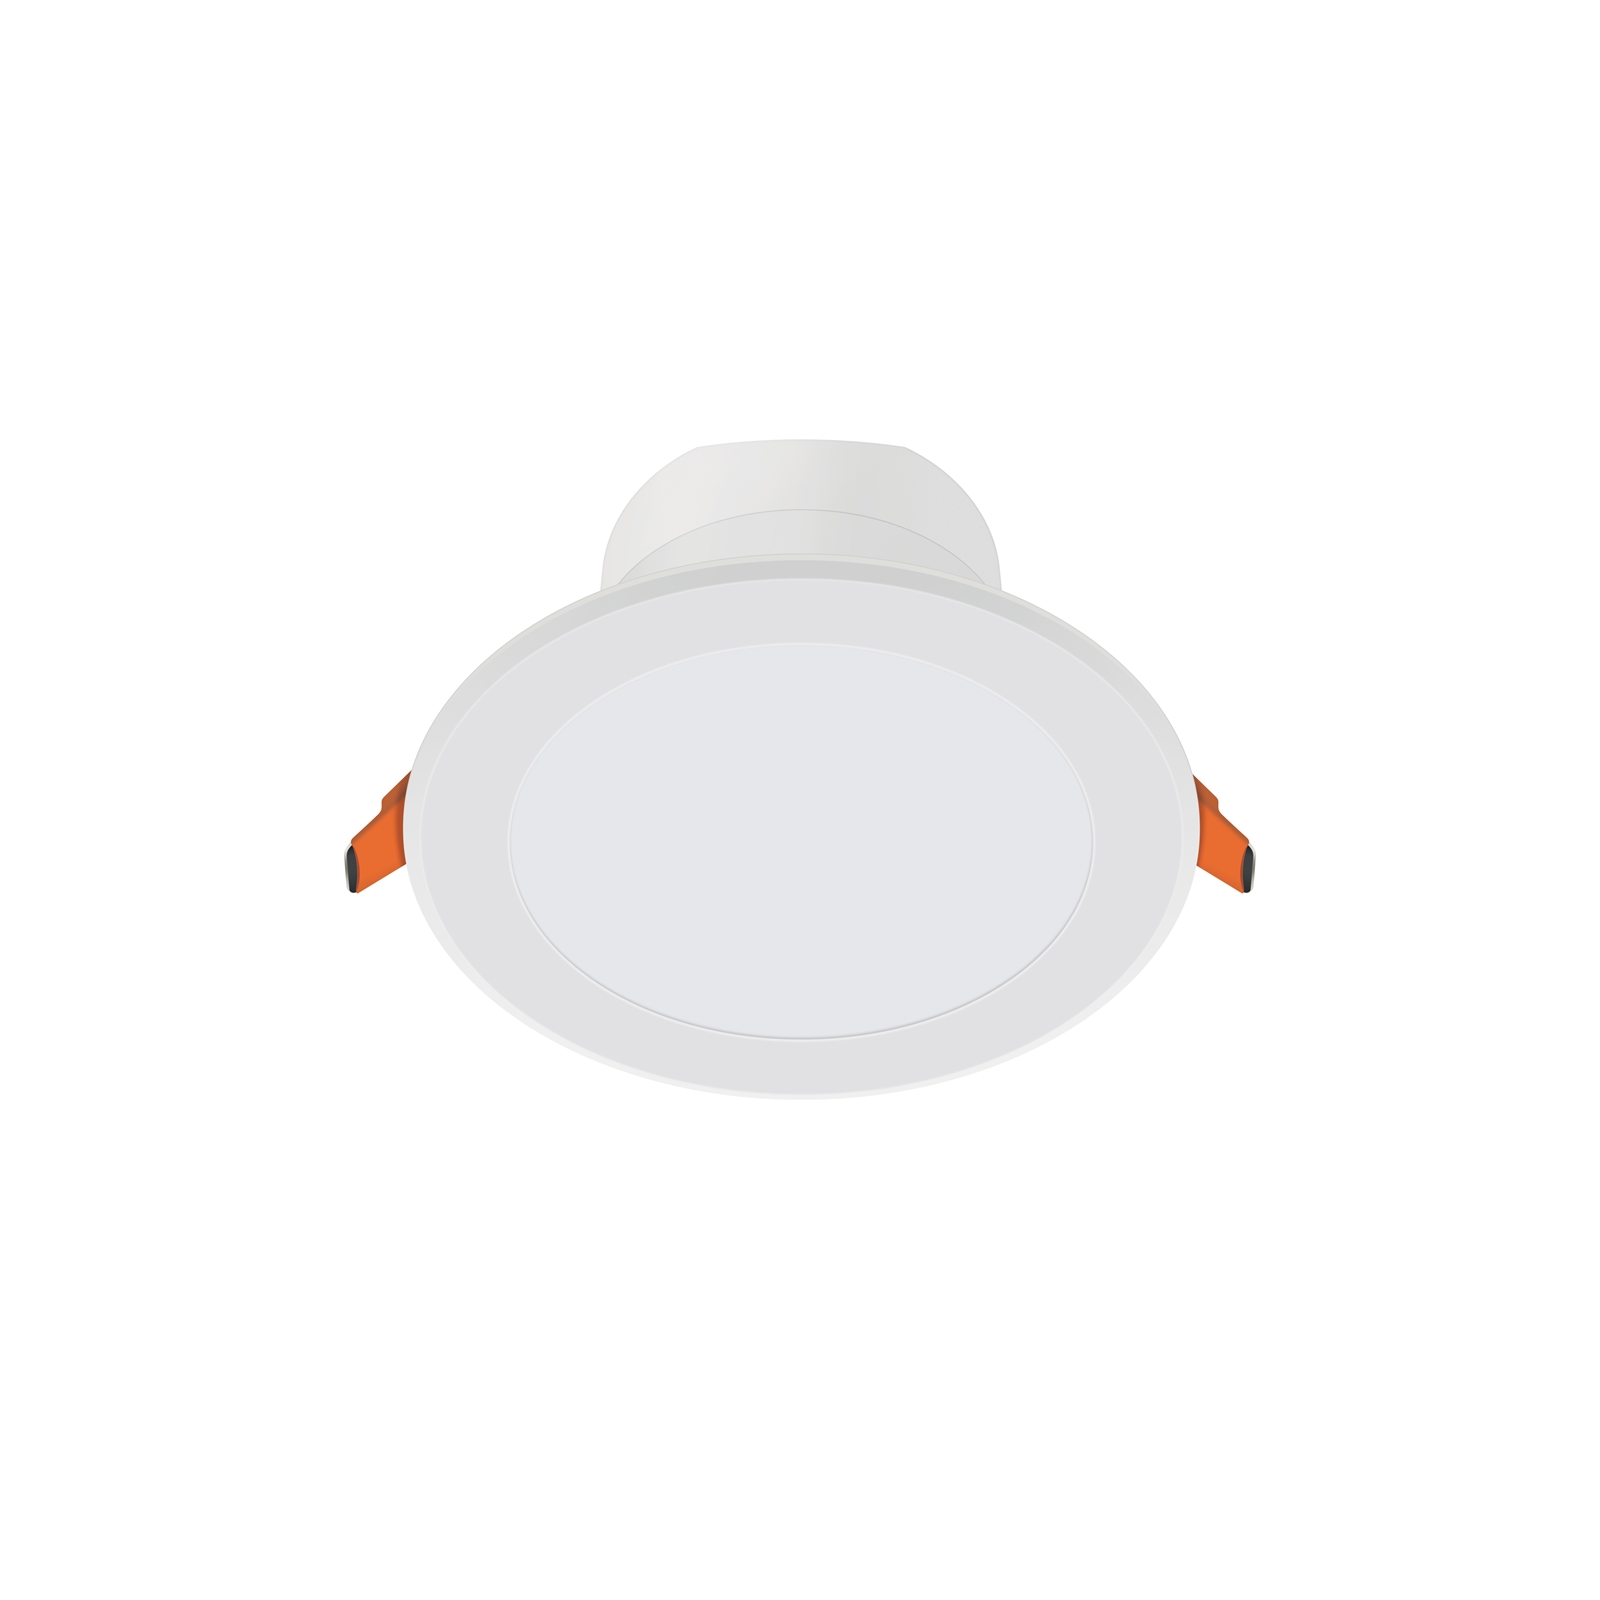 Osram 240V 10.5W LED 850lm Cool White Fixed Dimmable Downlight